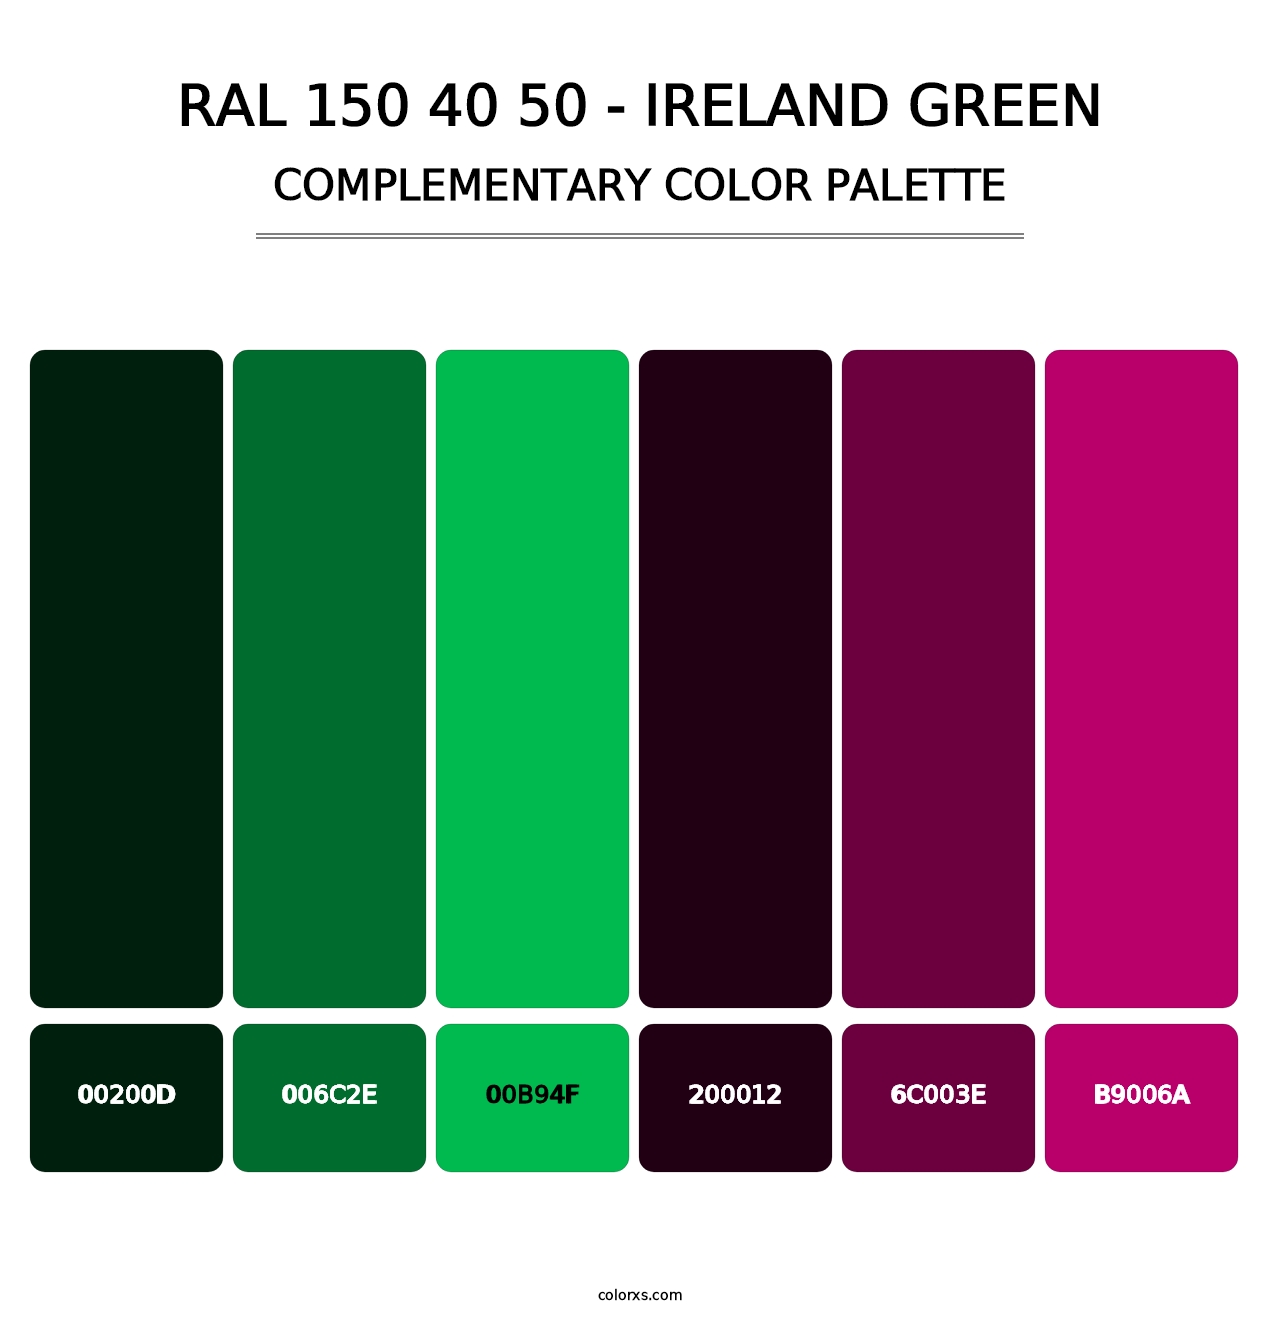 RAL 150 40 50 - Ireland Green - Complementary Color Palette